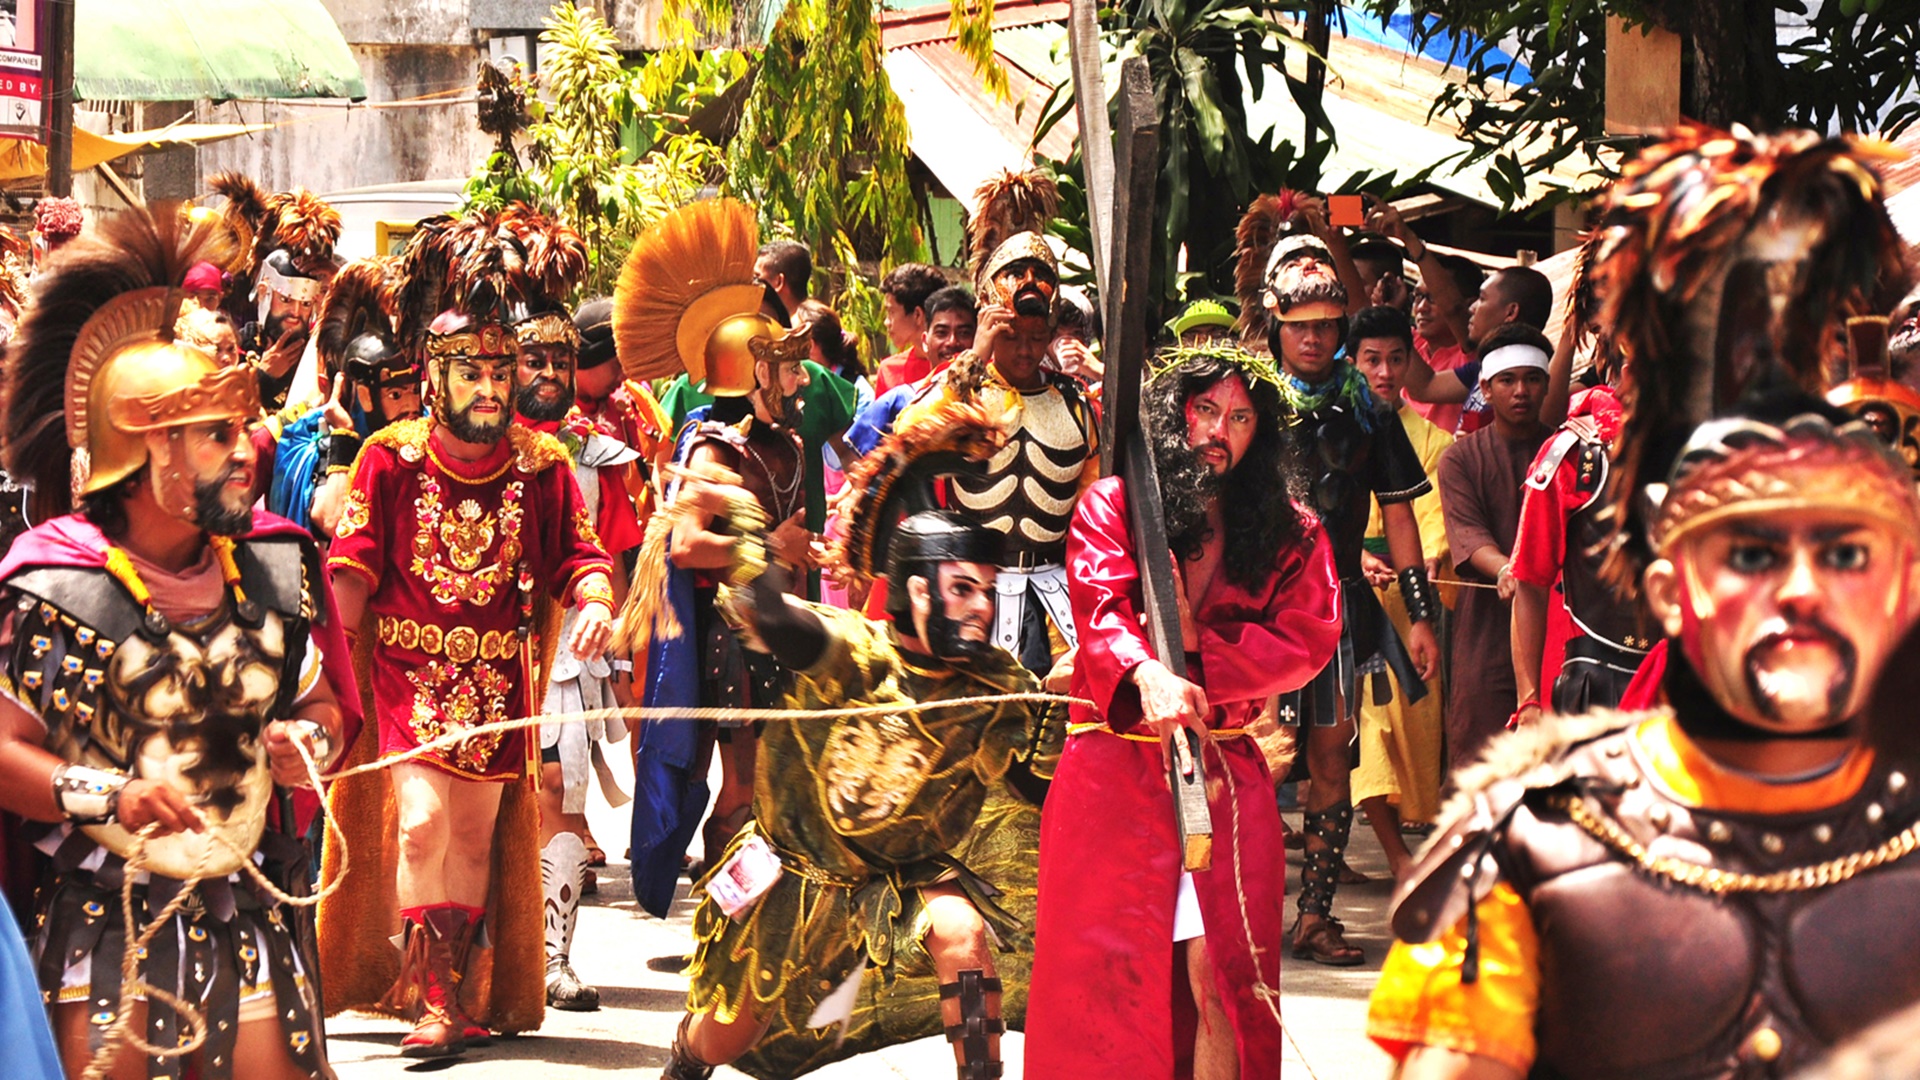 <p>A dramatic play or reenactment of the Passion of Jesus Christ performed during the Holy Week</p>